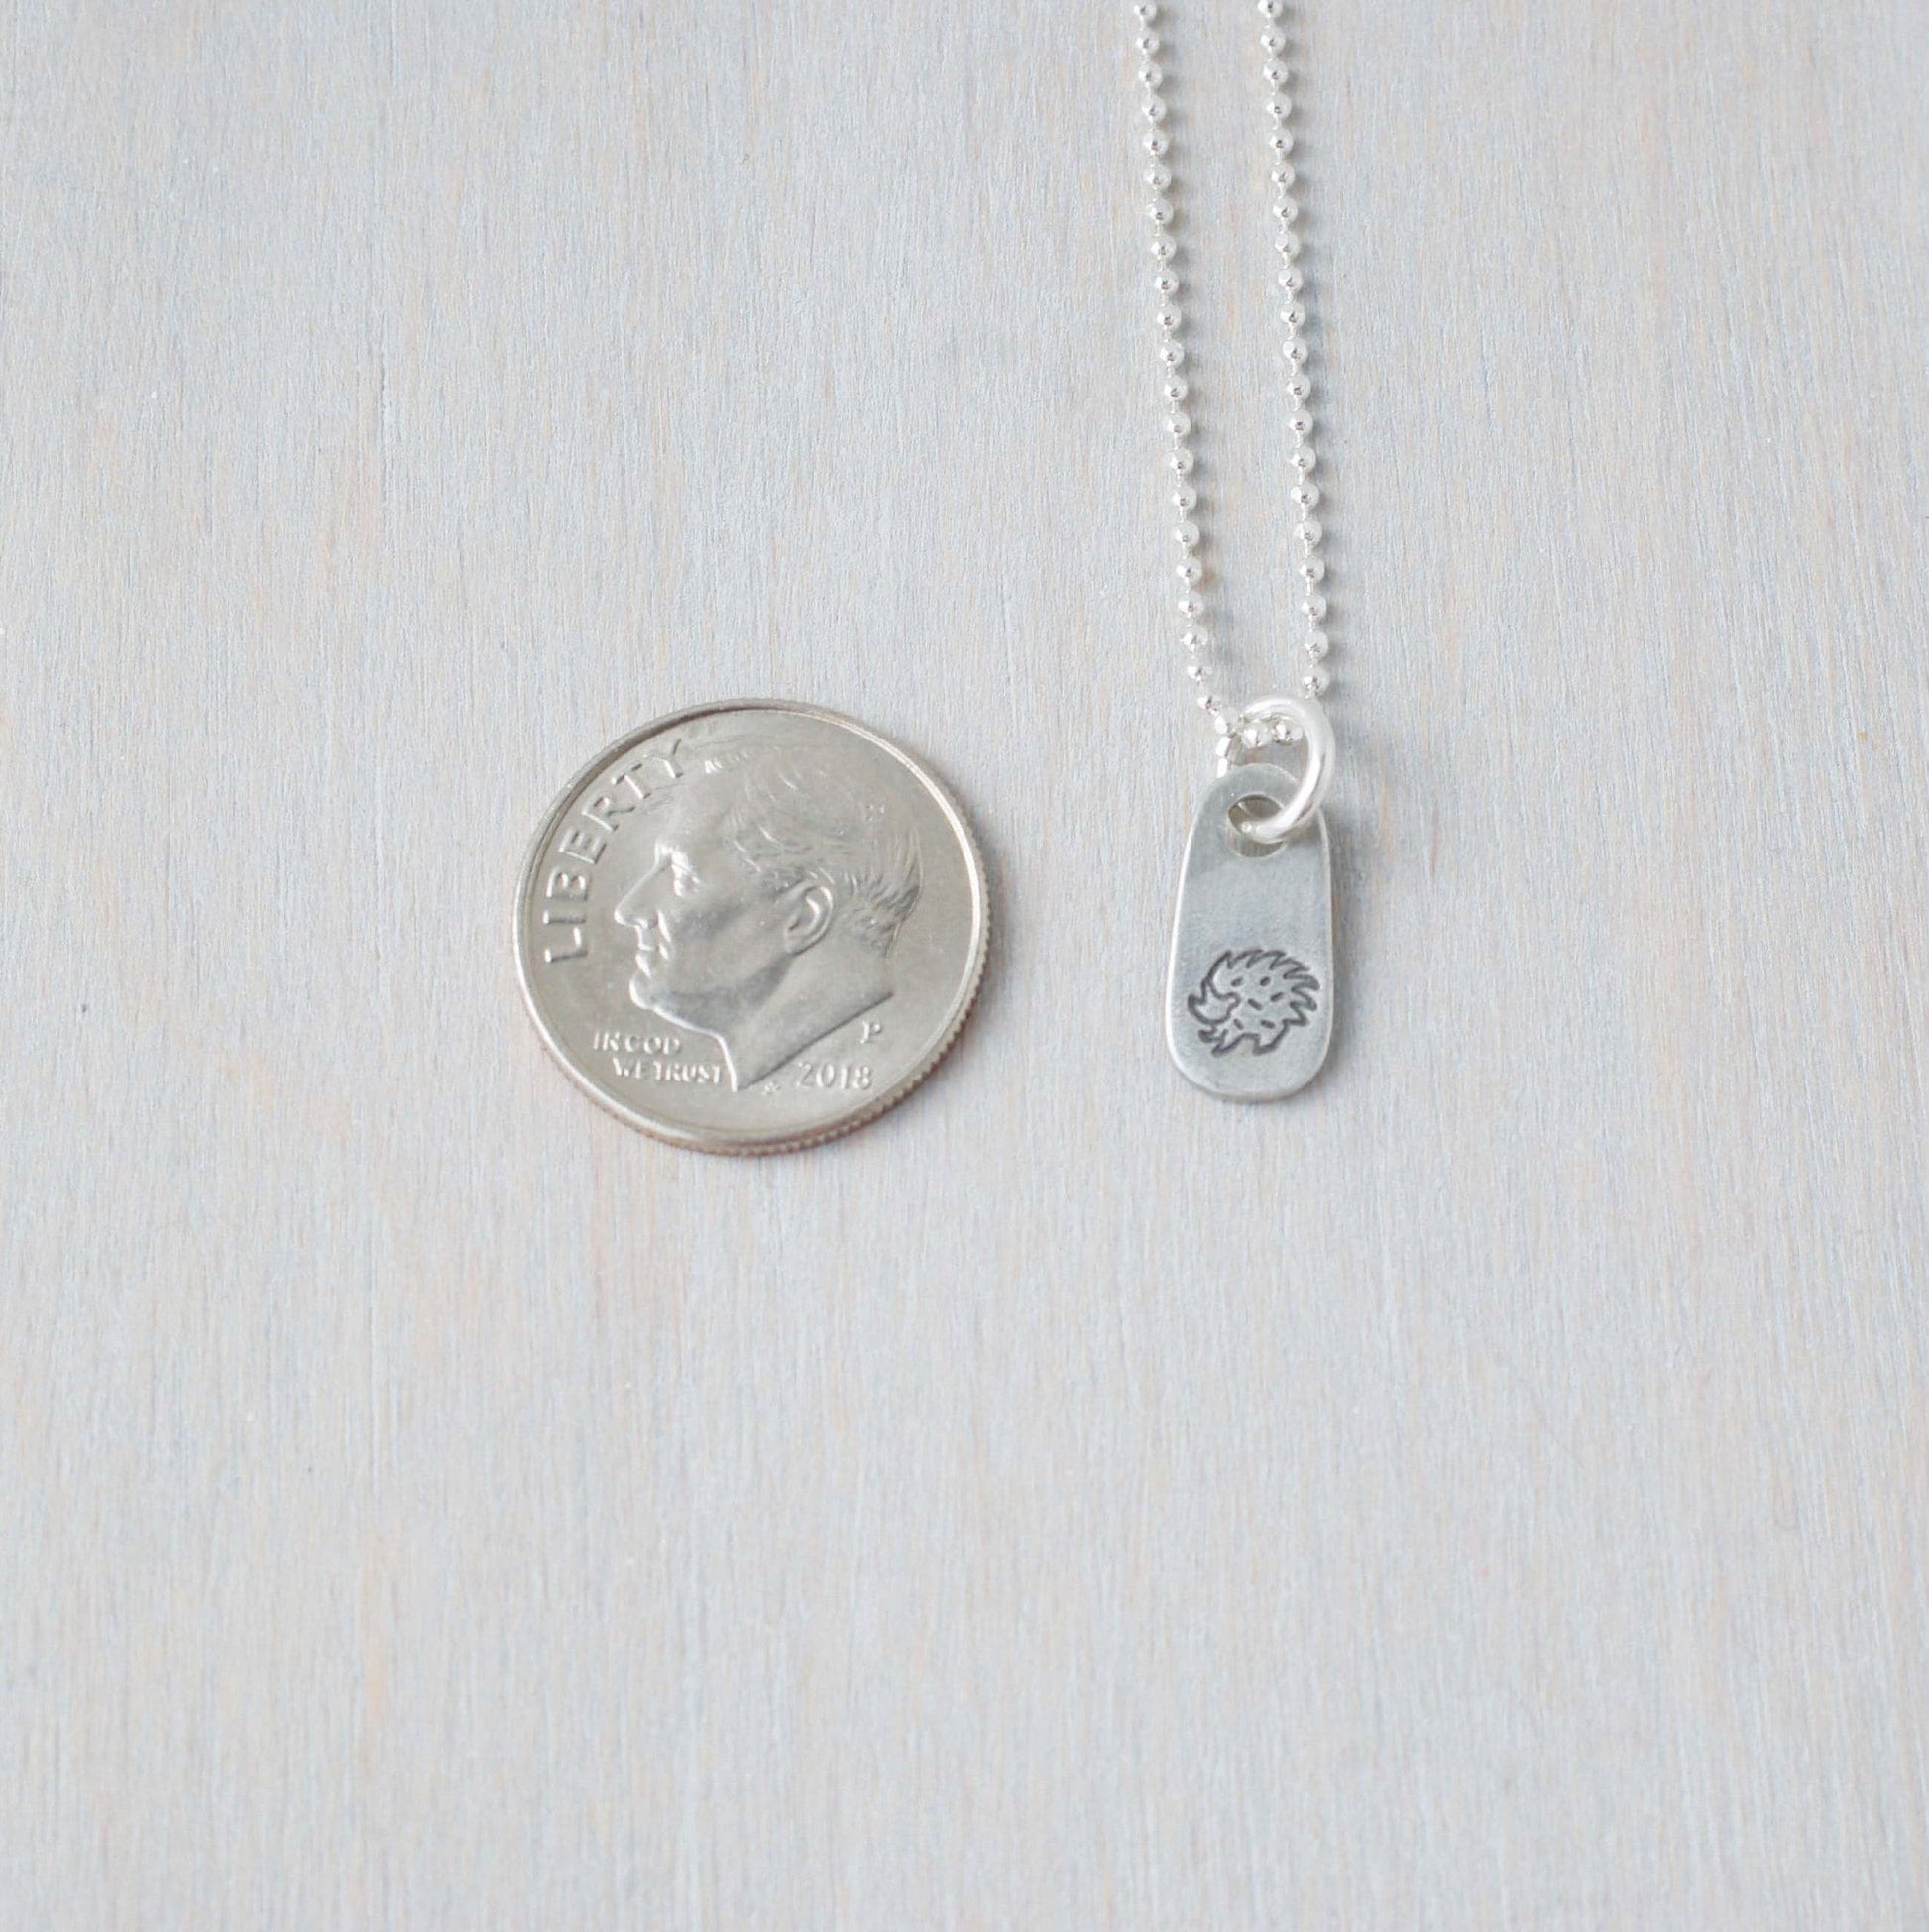 Silver hedgehog necklace in artisan pewter next to dime